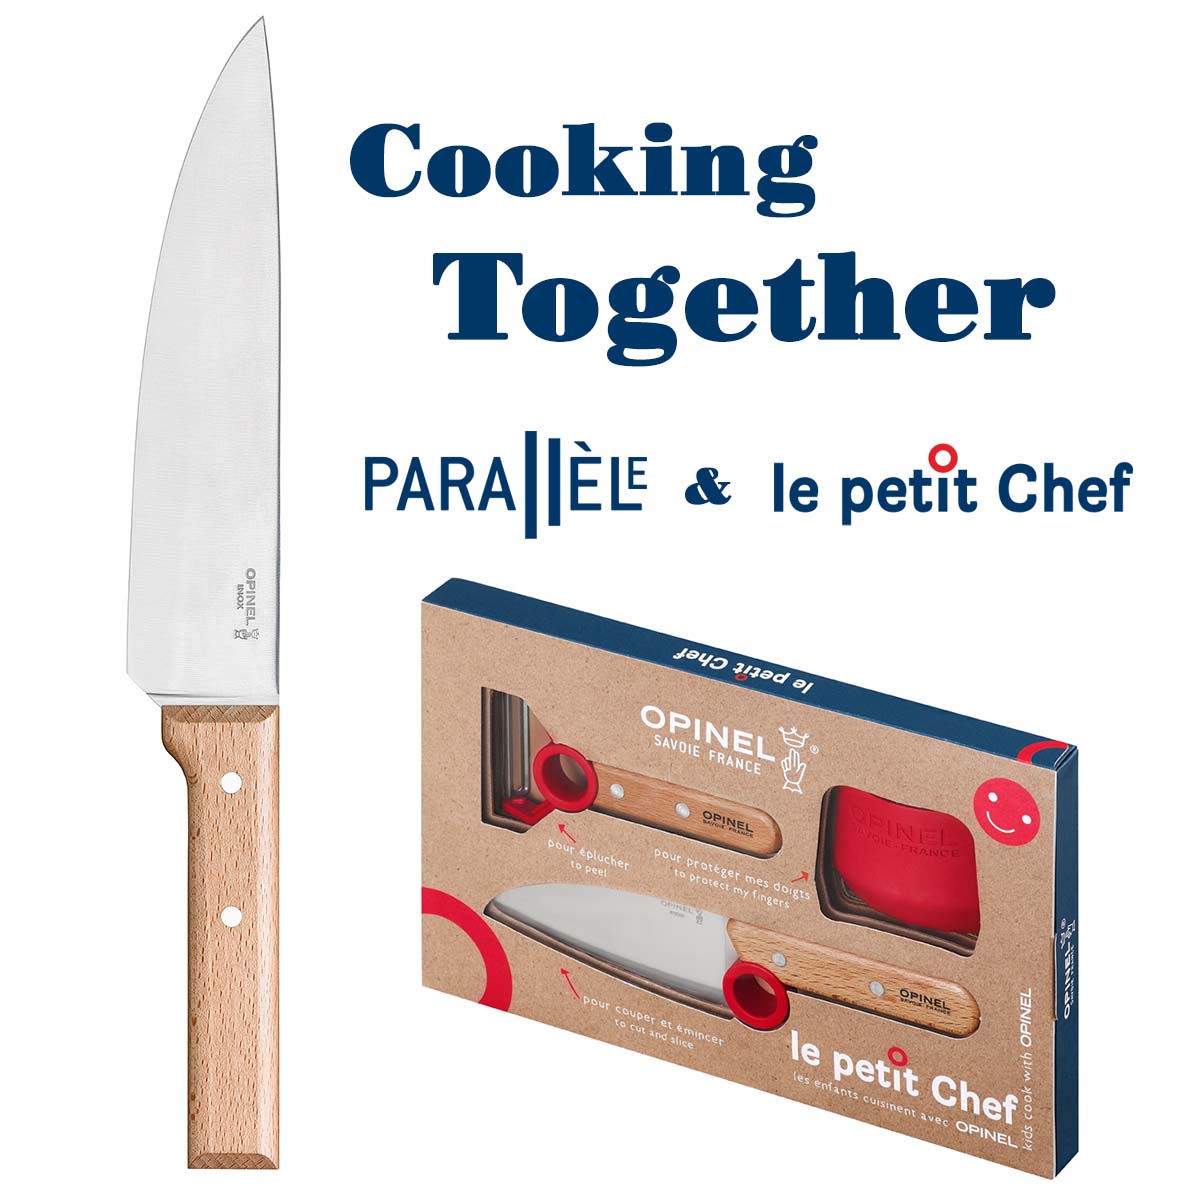 Cooking together : Le petit chef & Parallele Chef Knife></a></p>
<form action=